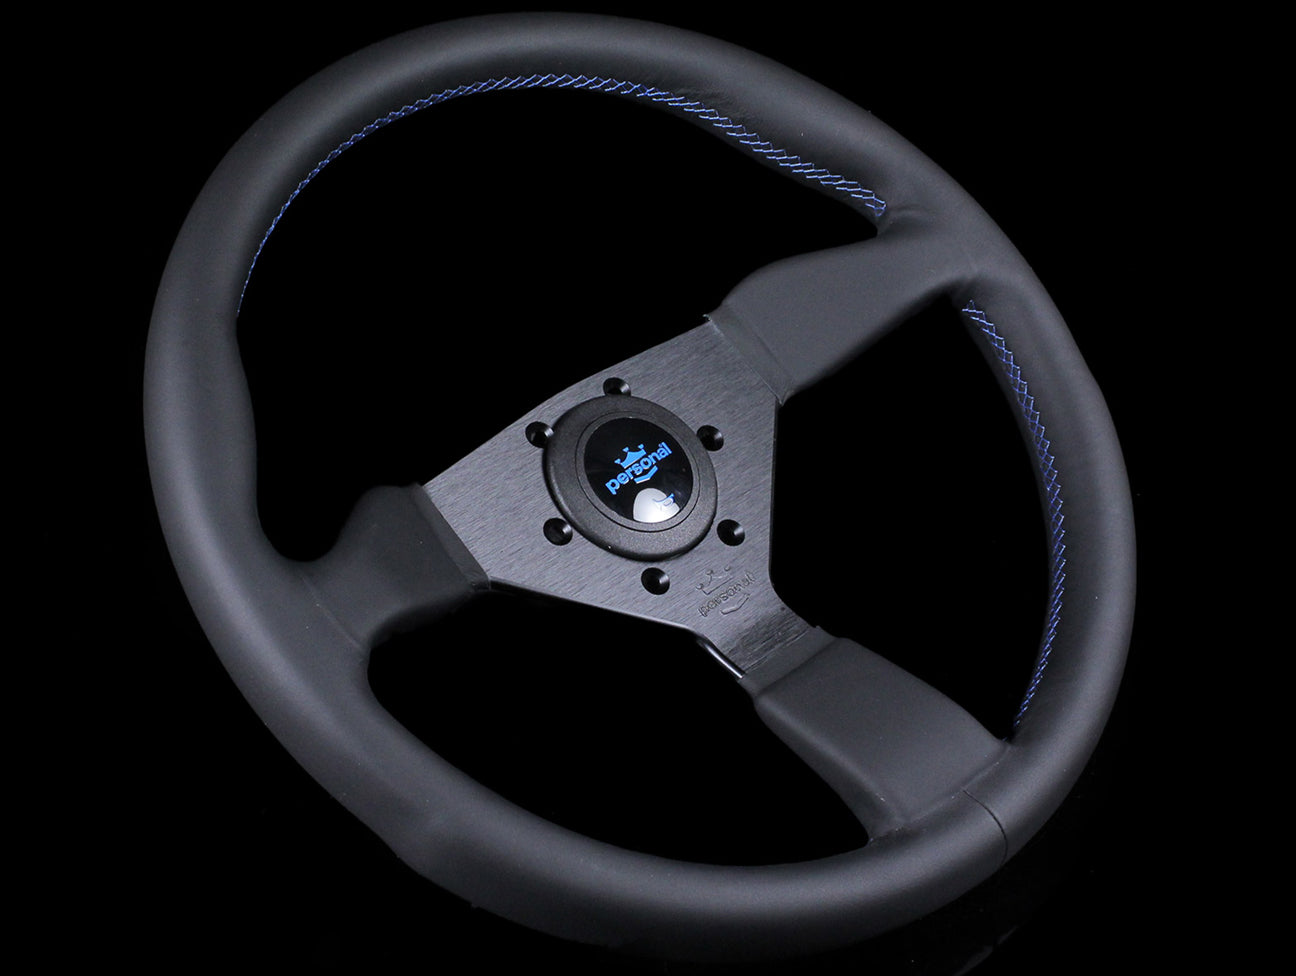 Personal Neo Grinta 330mm Steering Wheel - Black Leather / Blue Stitch